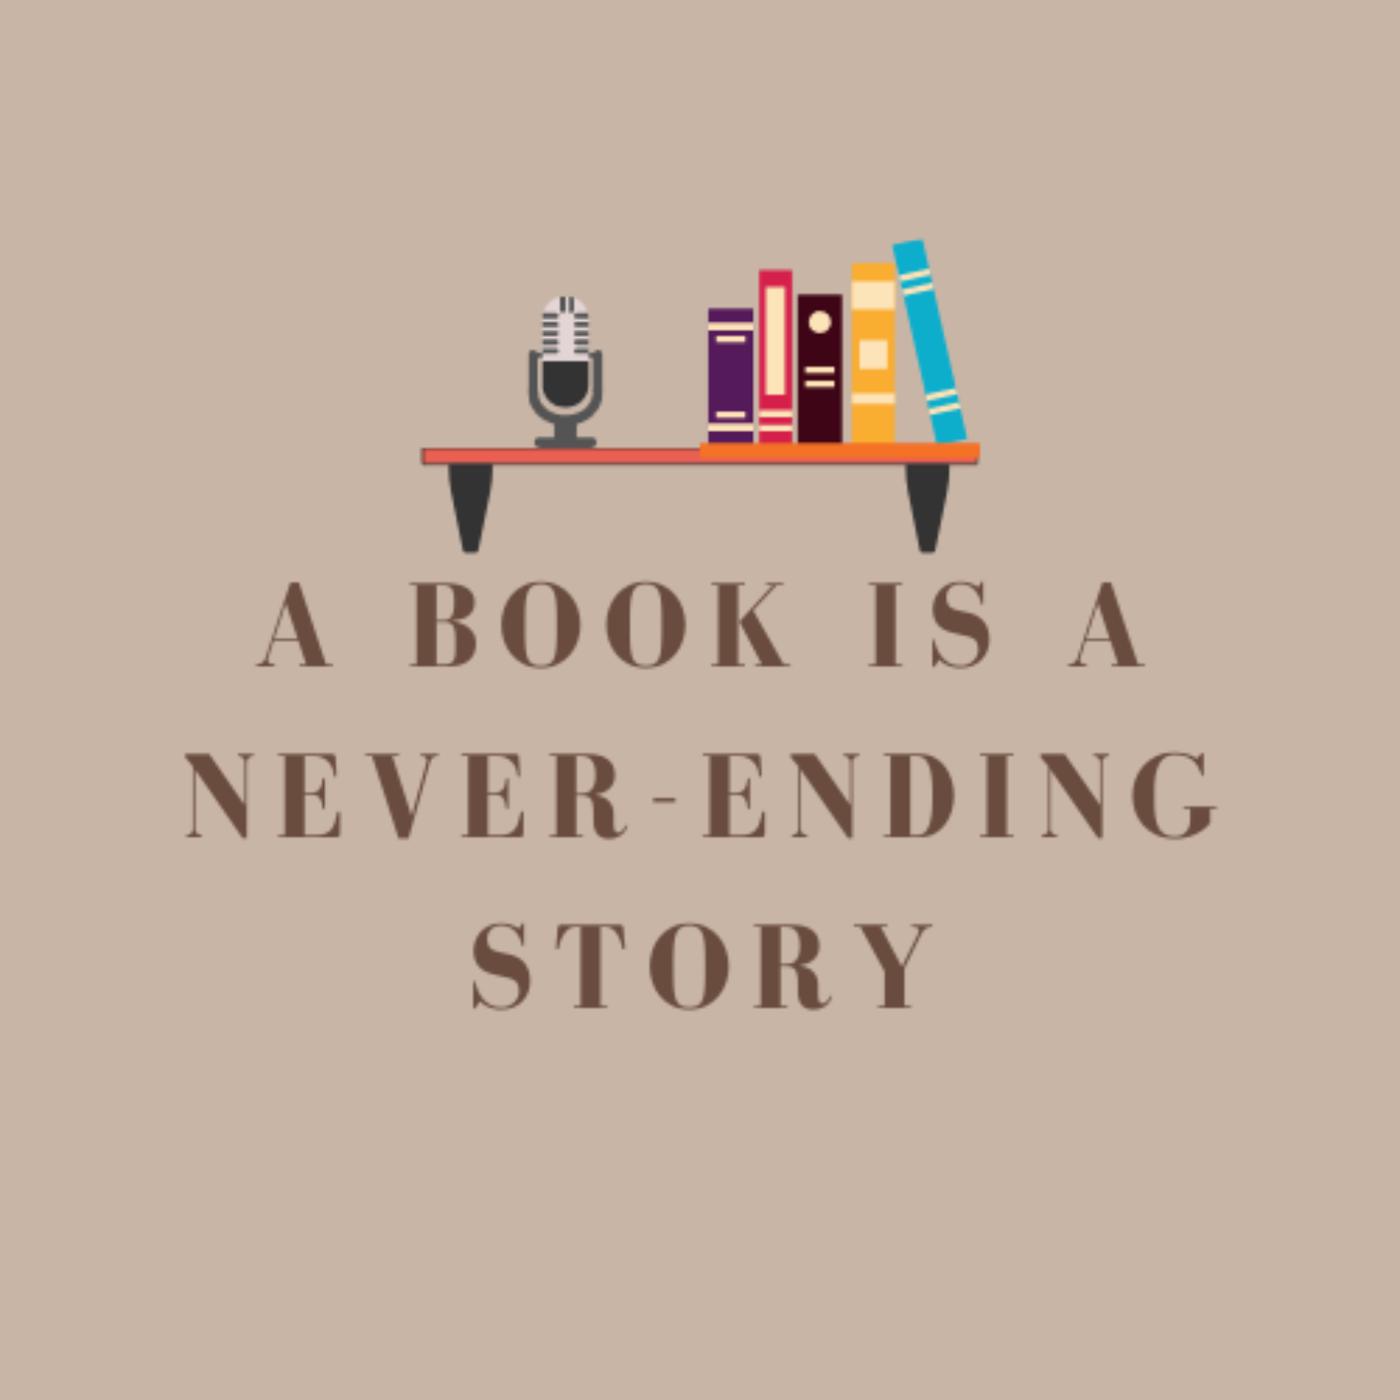 a-book-is-a-never-ending-story-NTPXjlf_M4c-Nv-klRWnUI_.1400x1400